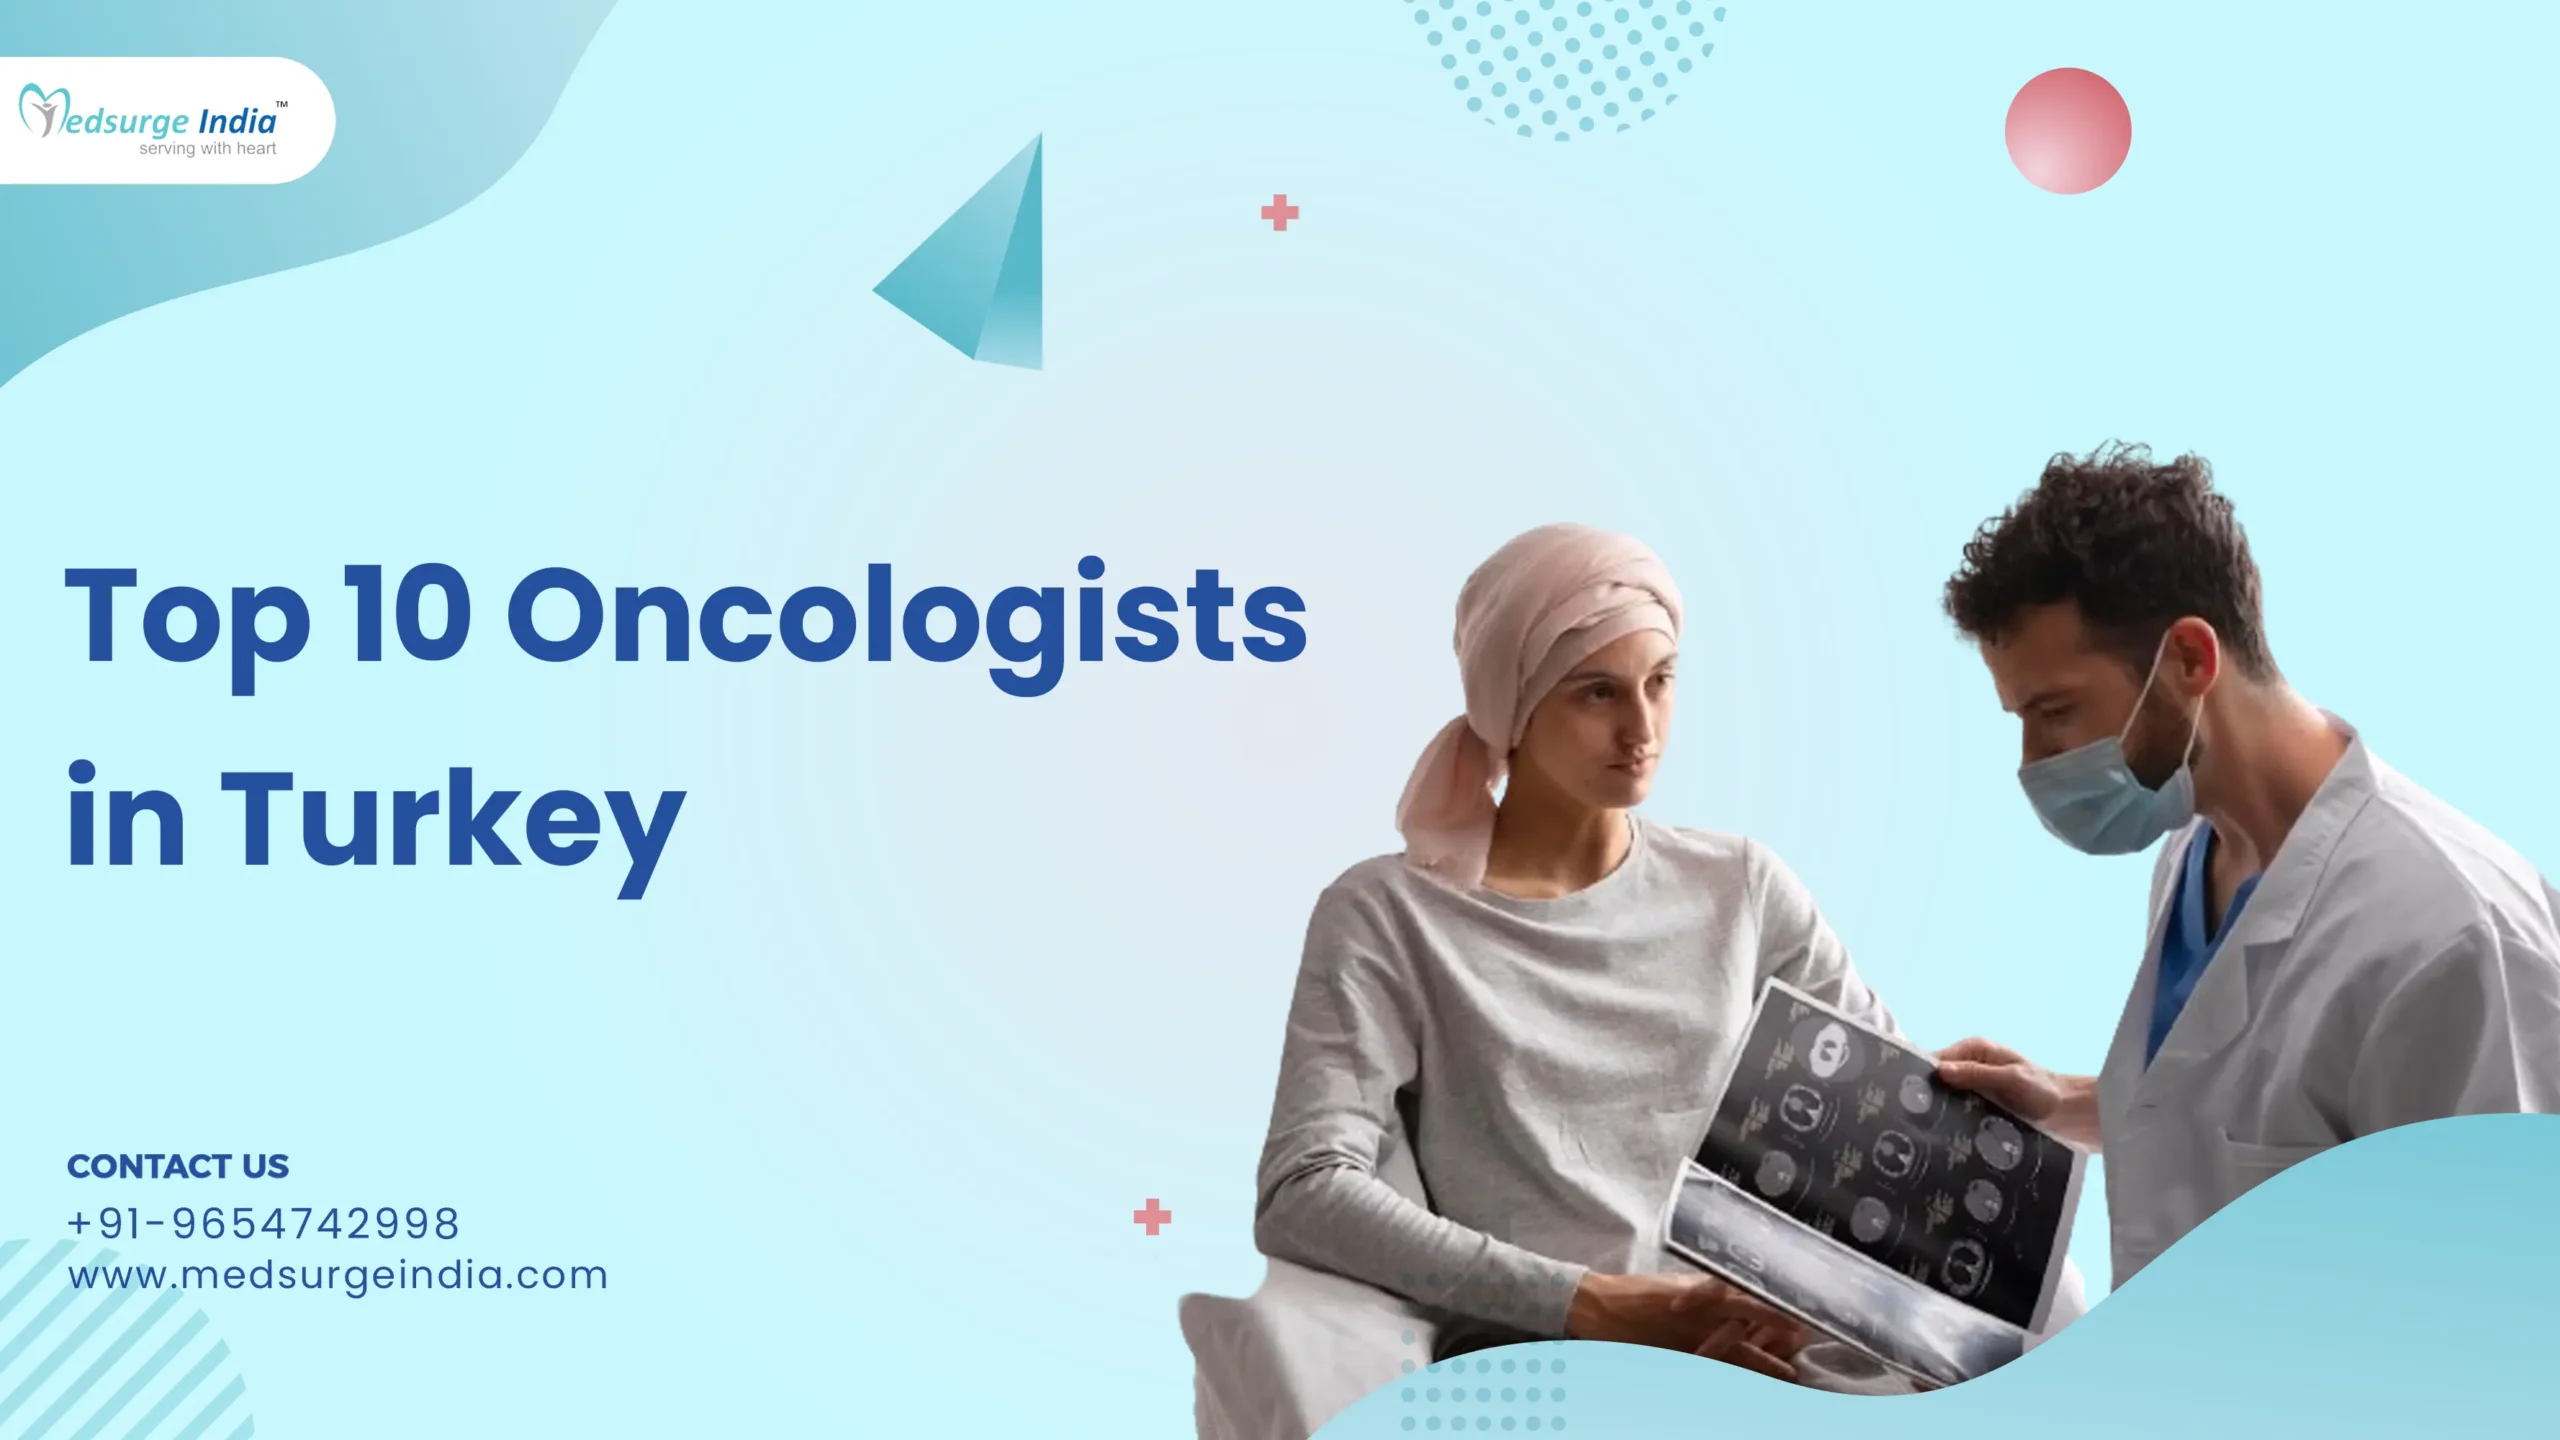 Top 10 Oncologists in Turkey